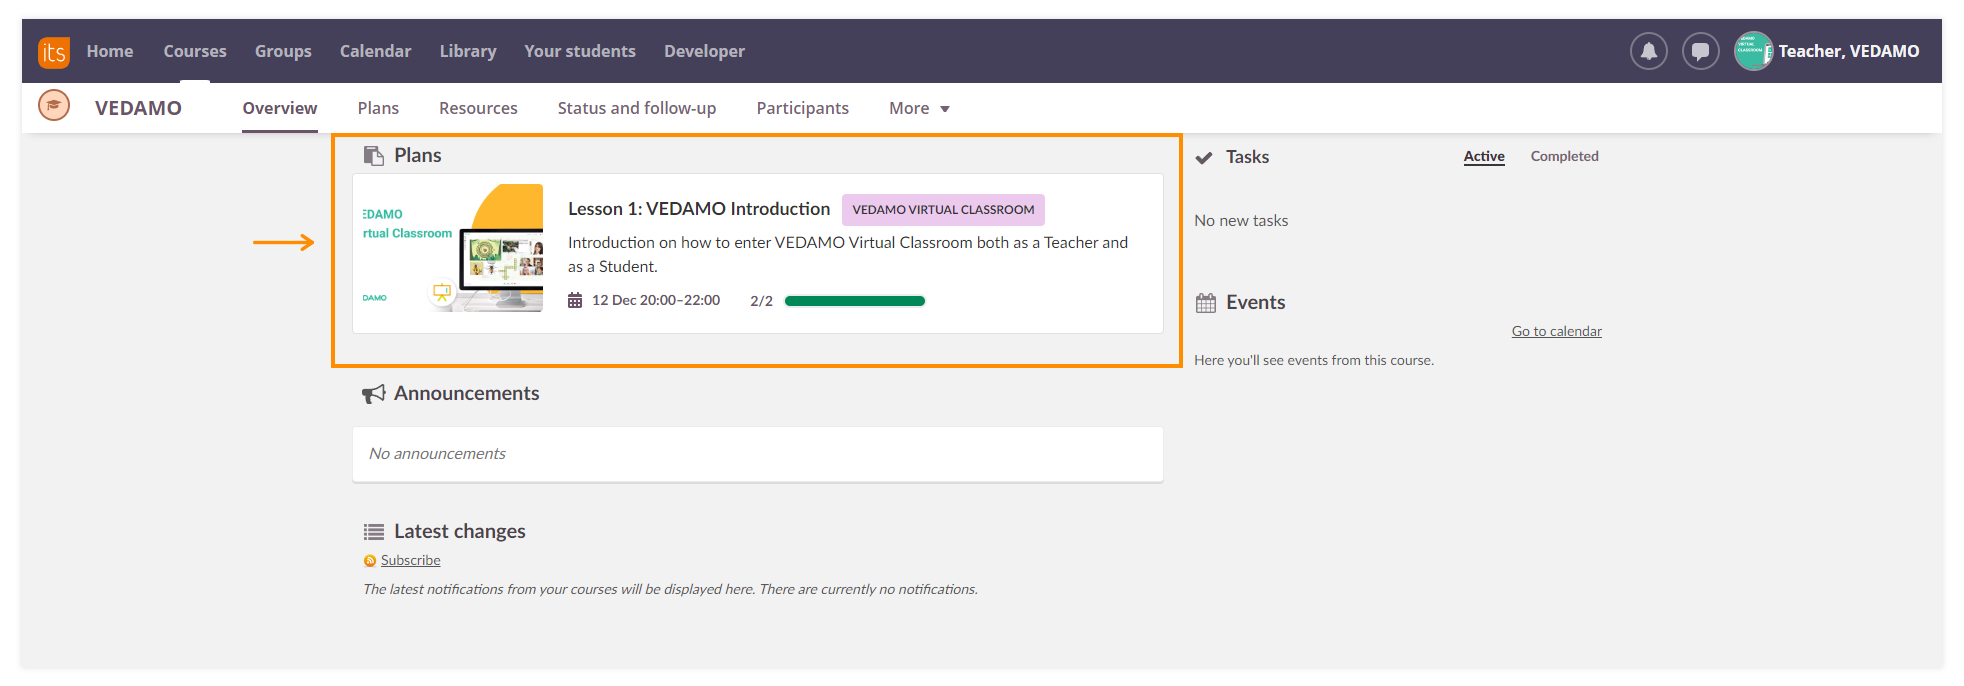 How to use VEDAMO Virtual Classroom as a Teacher in itslearning: Select the correct lesson 